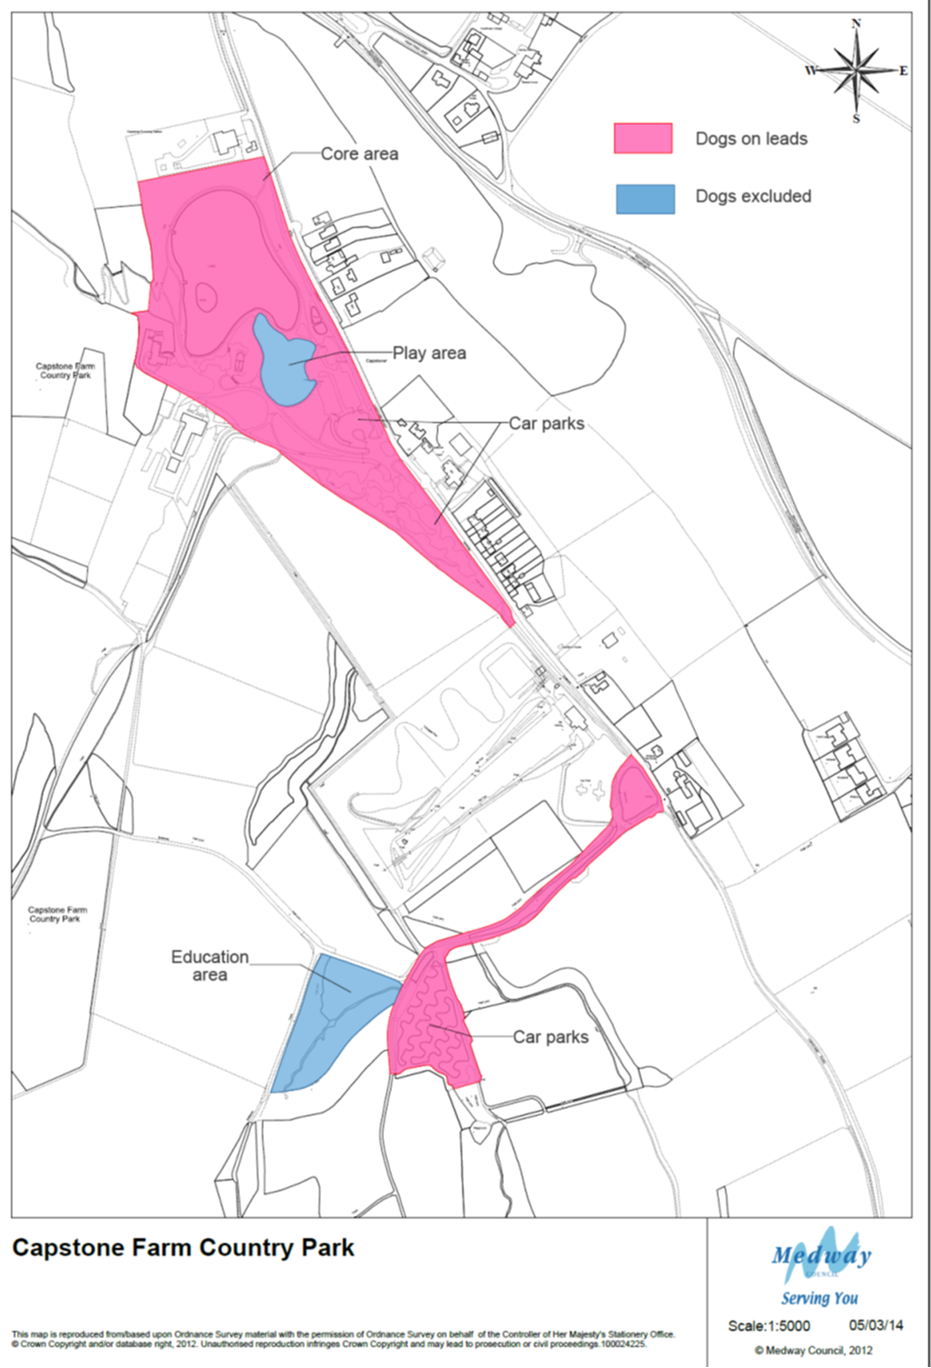 The proposed Capstone Country Park Dog Control Public Space Protection Order proposes that dogs must be a lead in the following two areas: Area 1 - in the main car park, around the lake and by the visitor centre and buildings and Area 2 – From the southern car park entrance to the car parks. The proposed Capstone Country Park Dog Control Public Space Protection Order proposes that dogs are excluded in the following two areas: Area 1 – the play area by the lake and main car park and Area 2 – the education area by the southern car park.